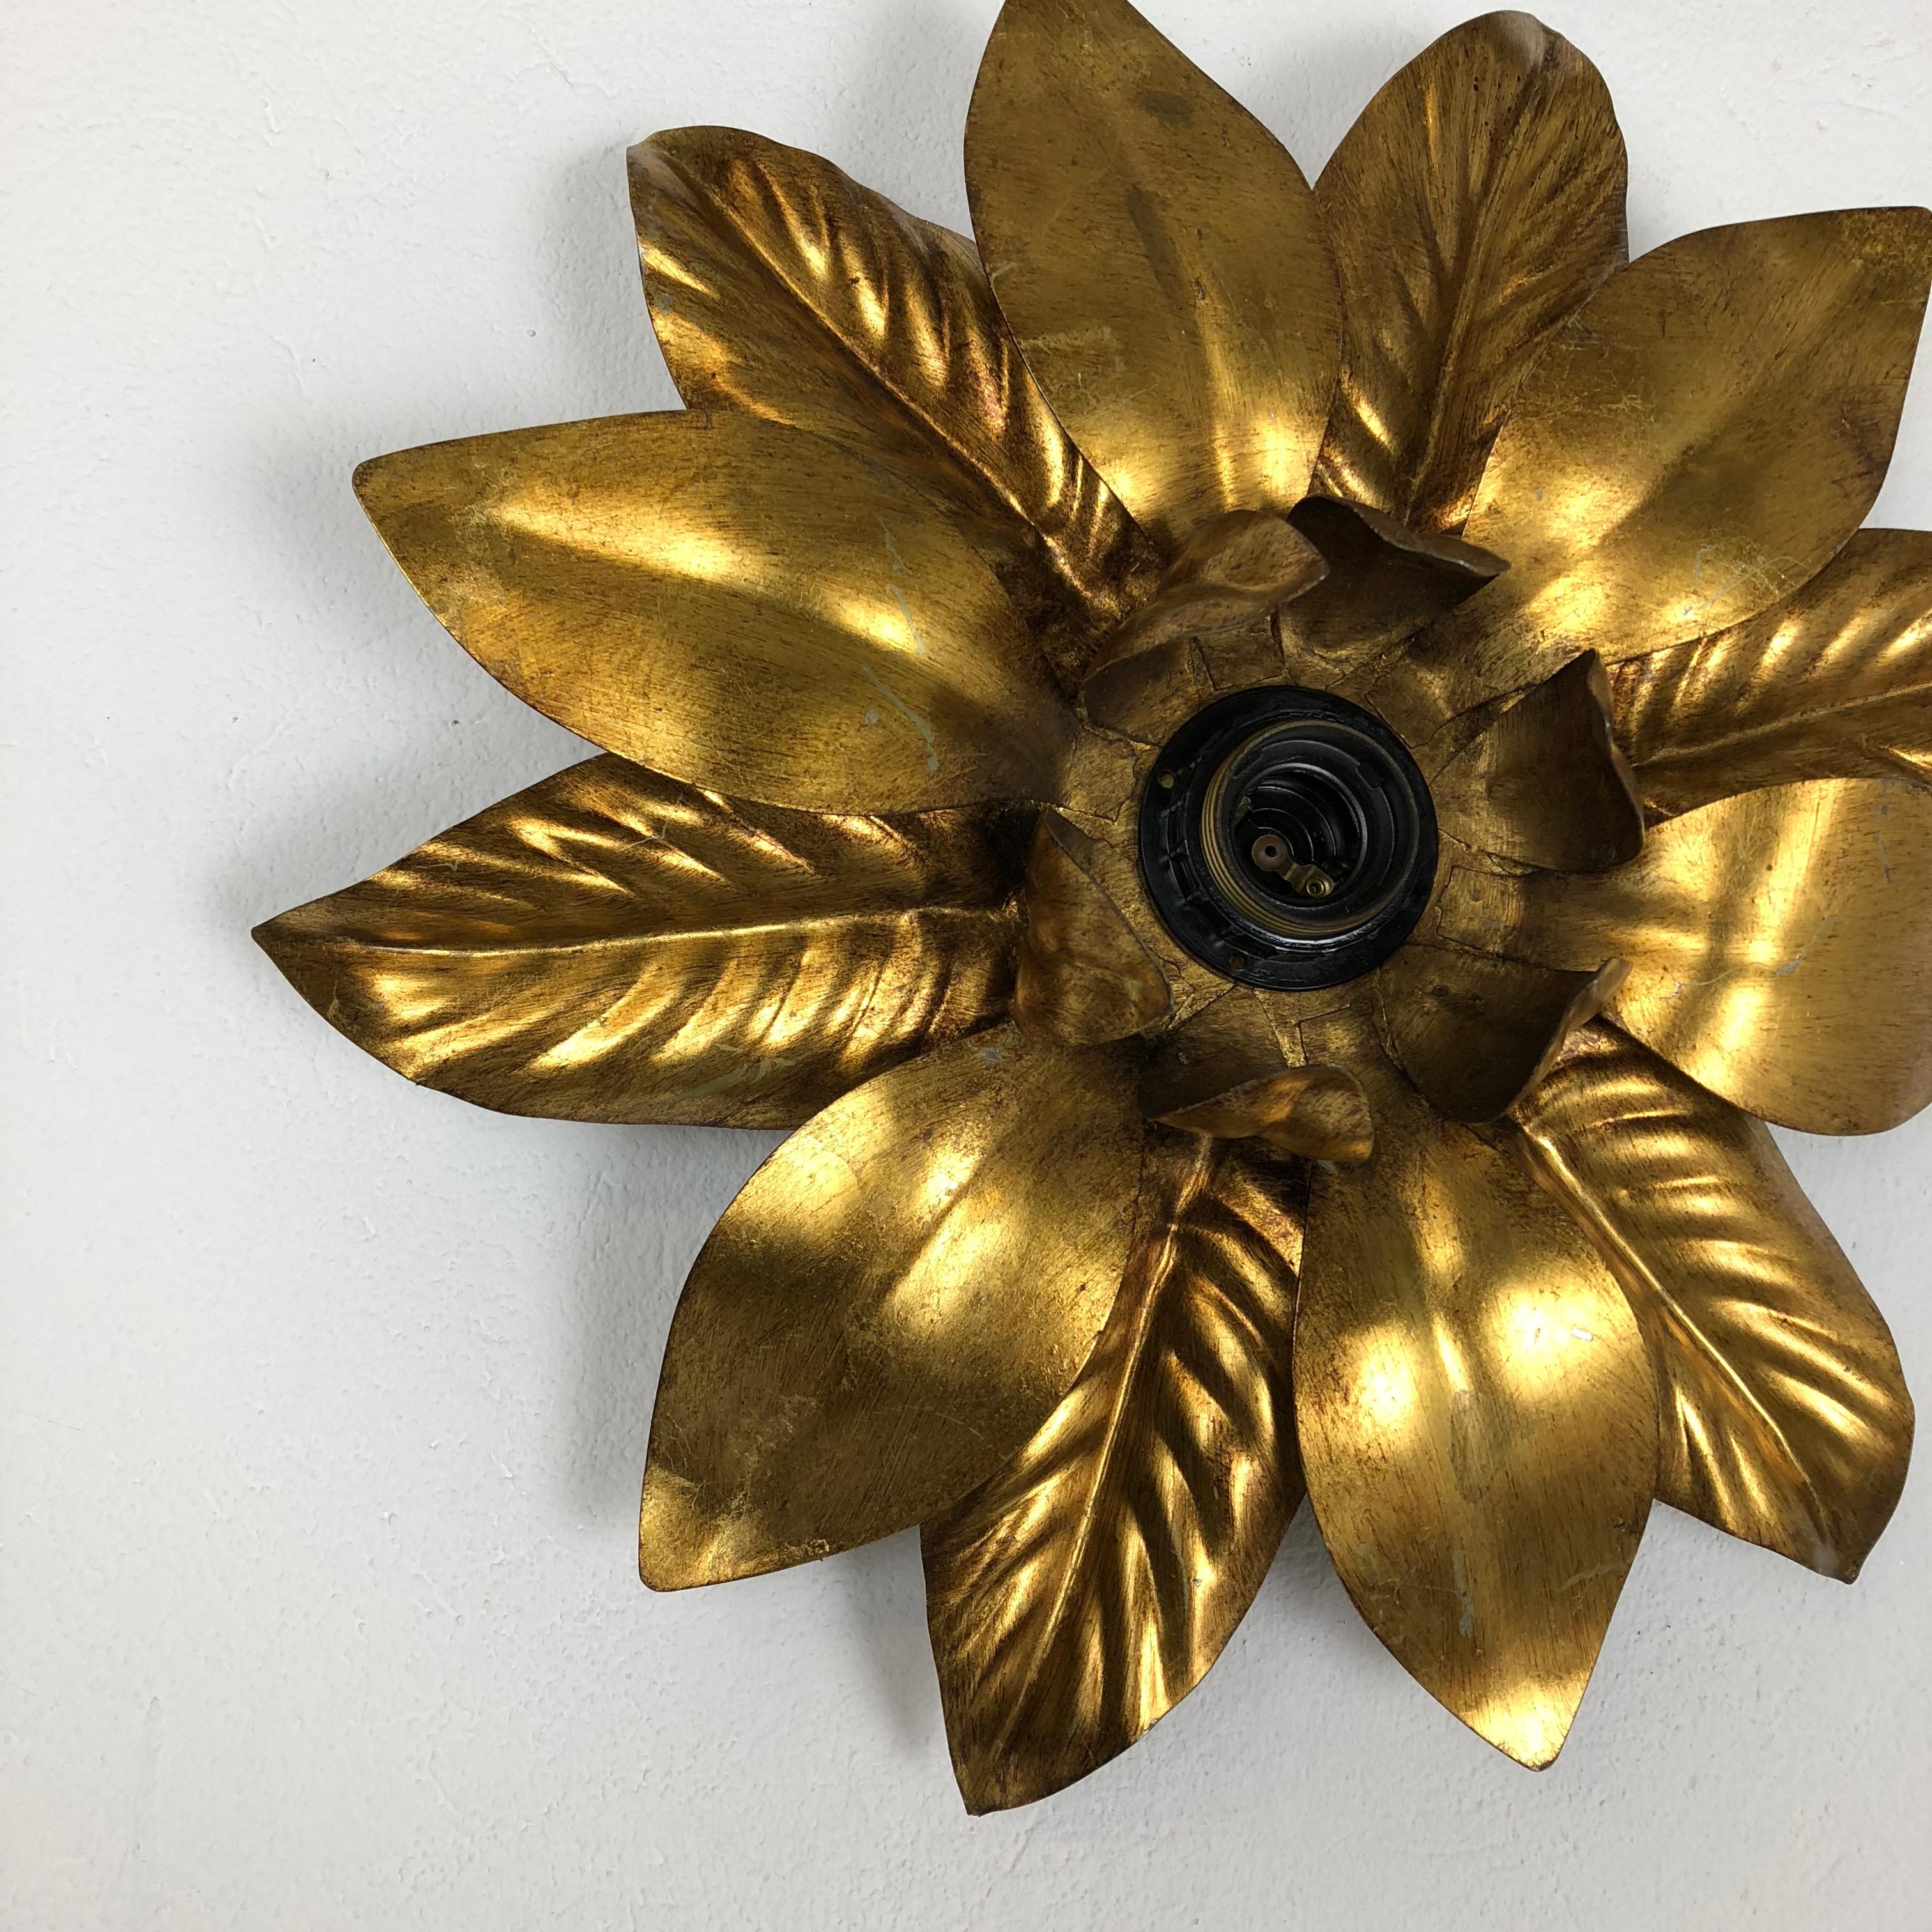 Set of 3 Golden Florentiner Leaf Theatre Wall Ceiling Light Sconces, Italy 1960s 1